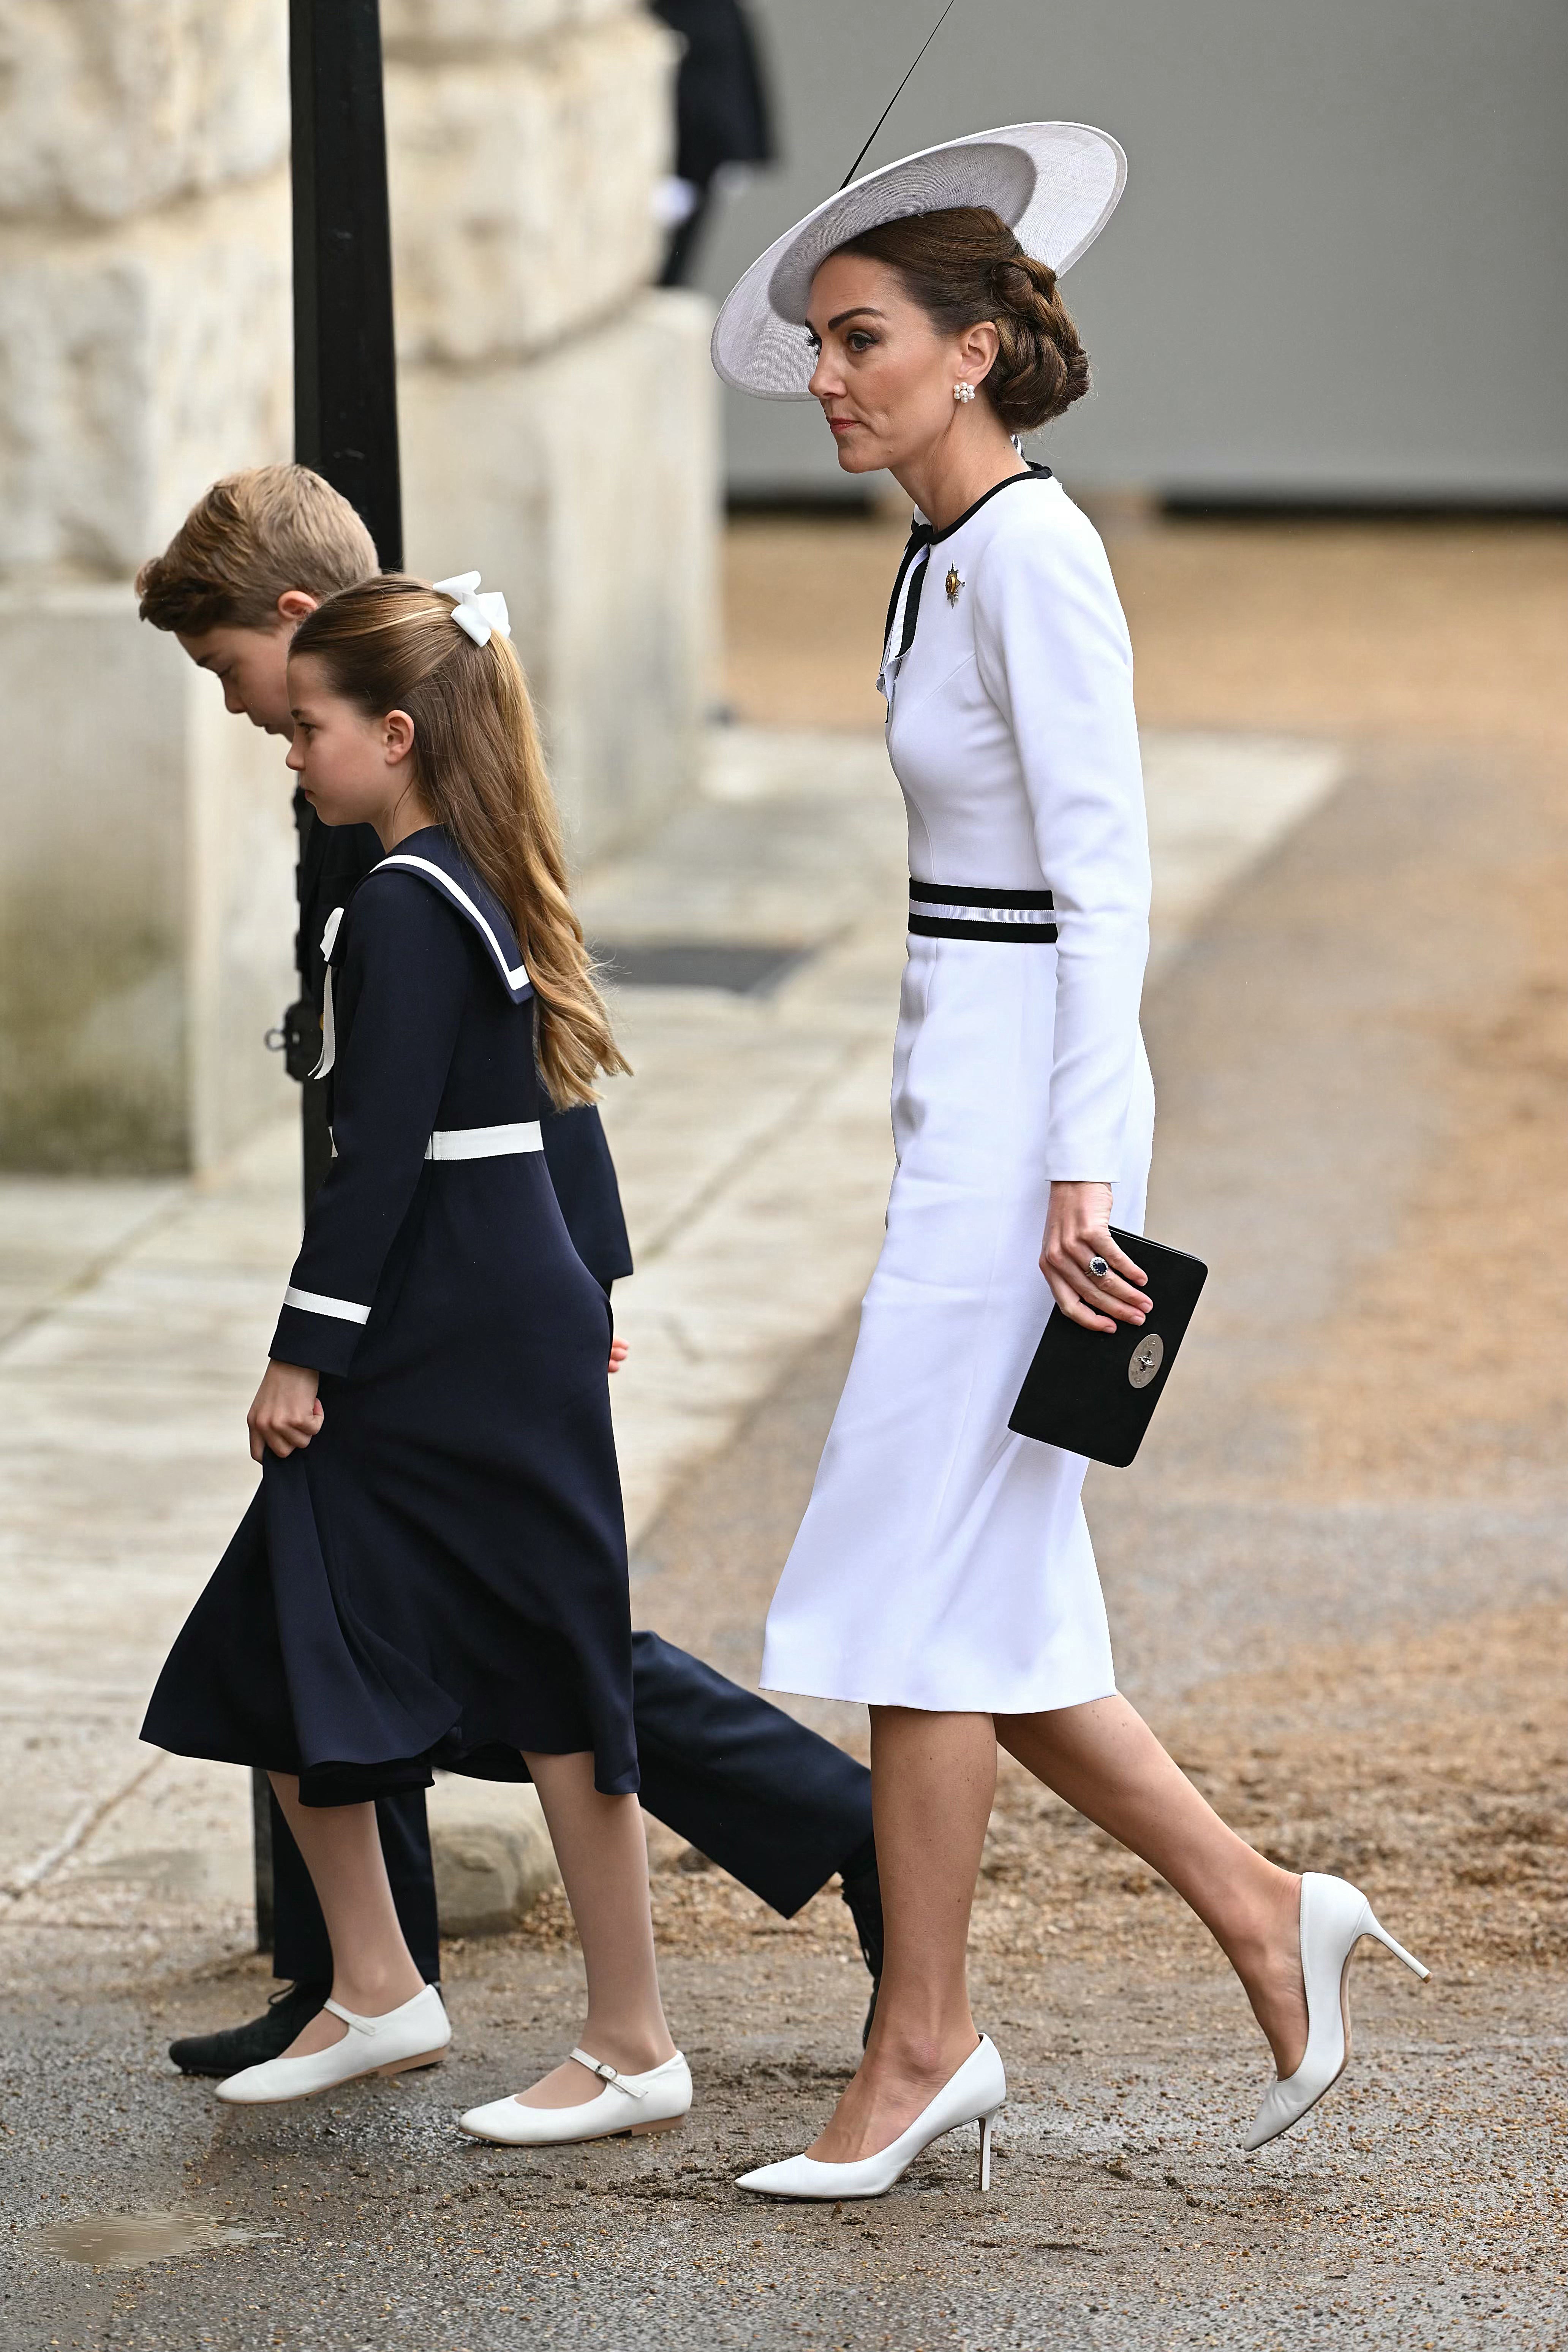 prince william, prince george, princess charlotte, princess of wales, king charles iii, trooping the colour, kate wears bold white dress last seen at coronation as she returns to public duties at trooping the colour